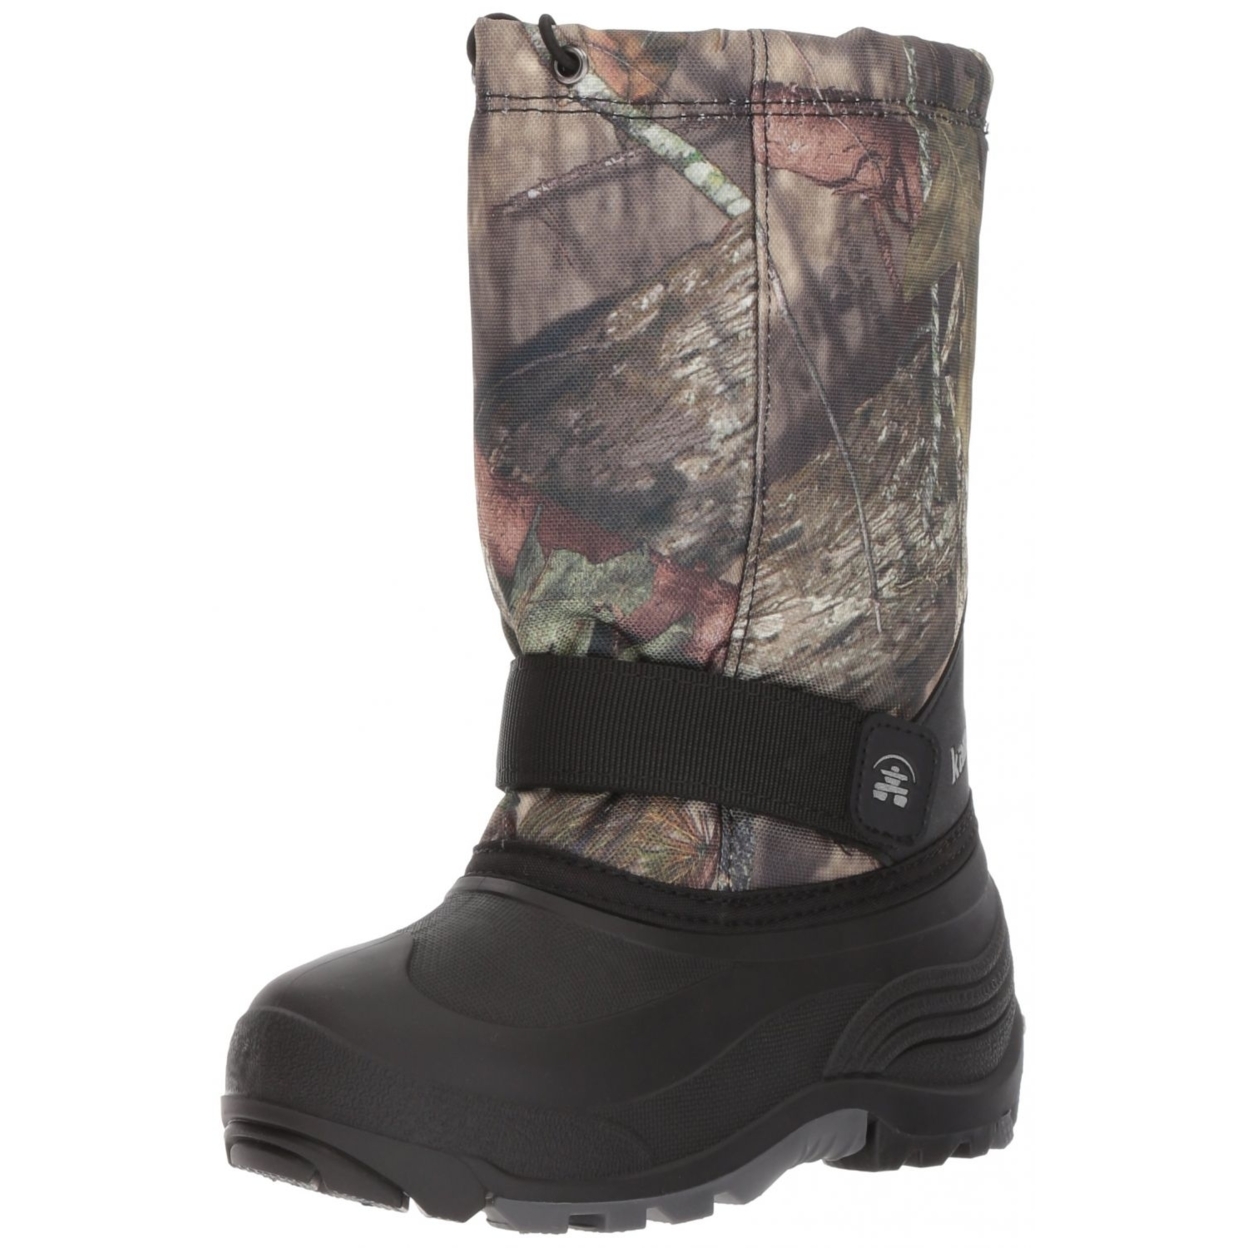 Kamik Rocket Cold Weather Boot (Toddler/Little Kid/Big Kid) 9 Toddler MOSSY OAK COUNTRY CAMO - MOSSY OAK COUNTRY CAMO, 2 Little Kid